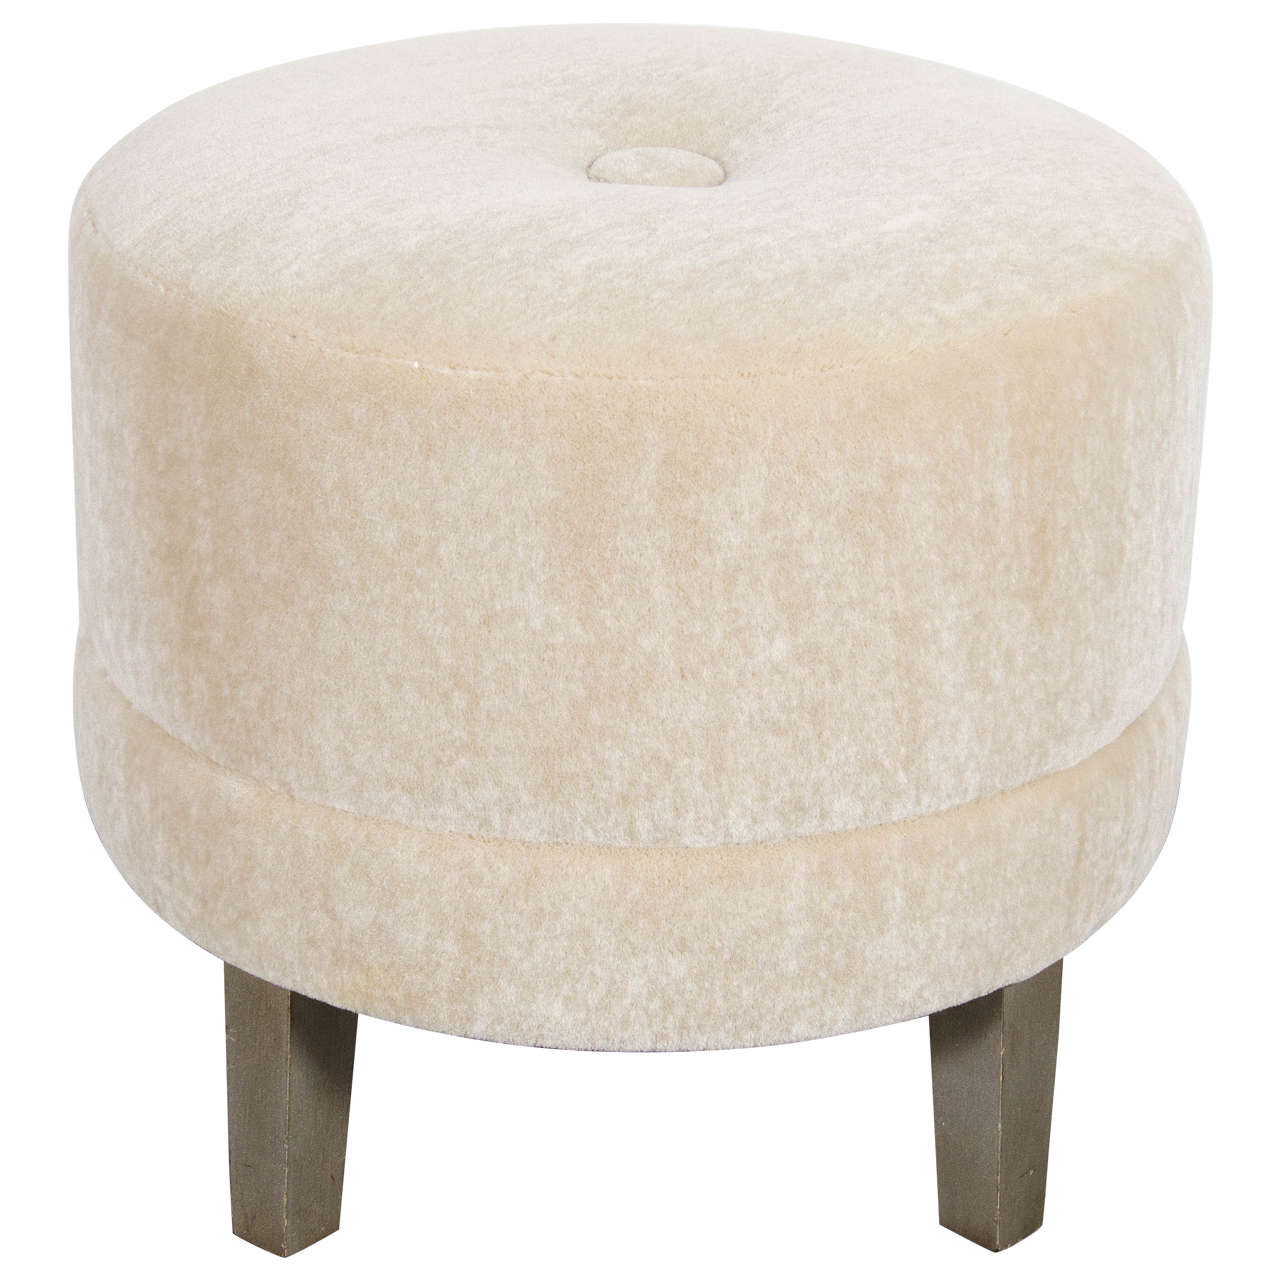 Art Deco Round Stool in Camel Mohair with Button Detail and Silvered Legs